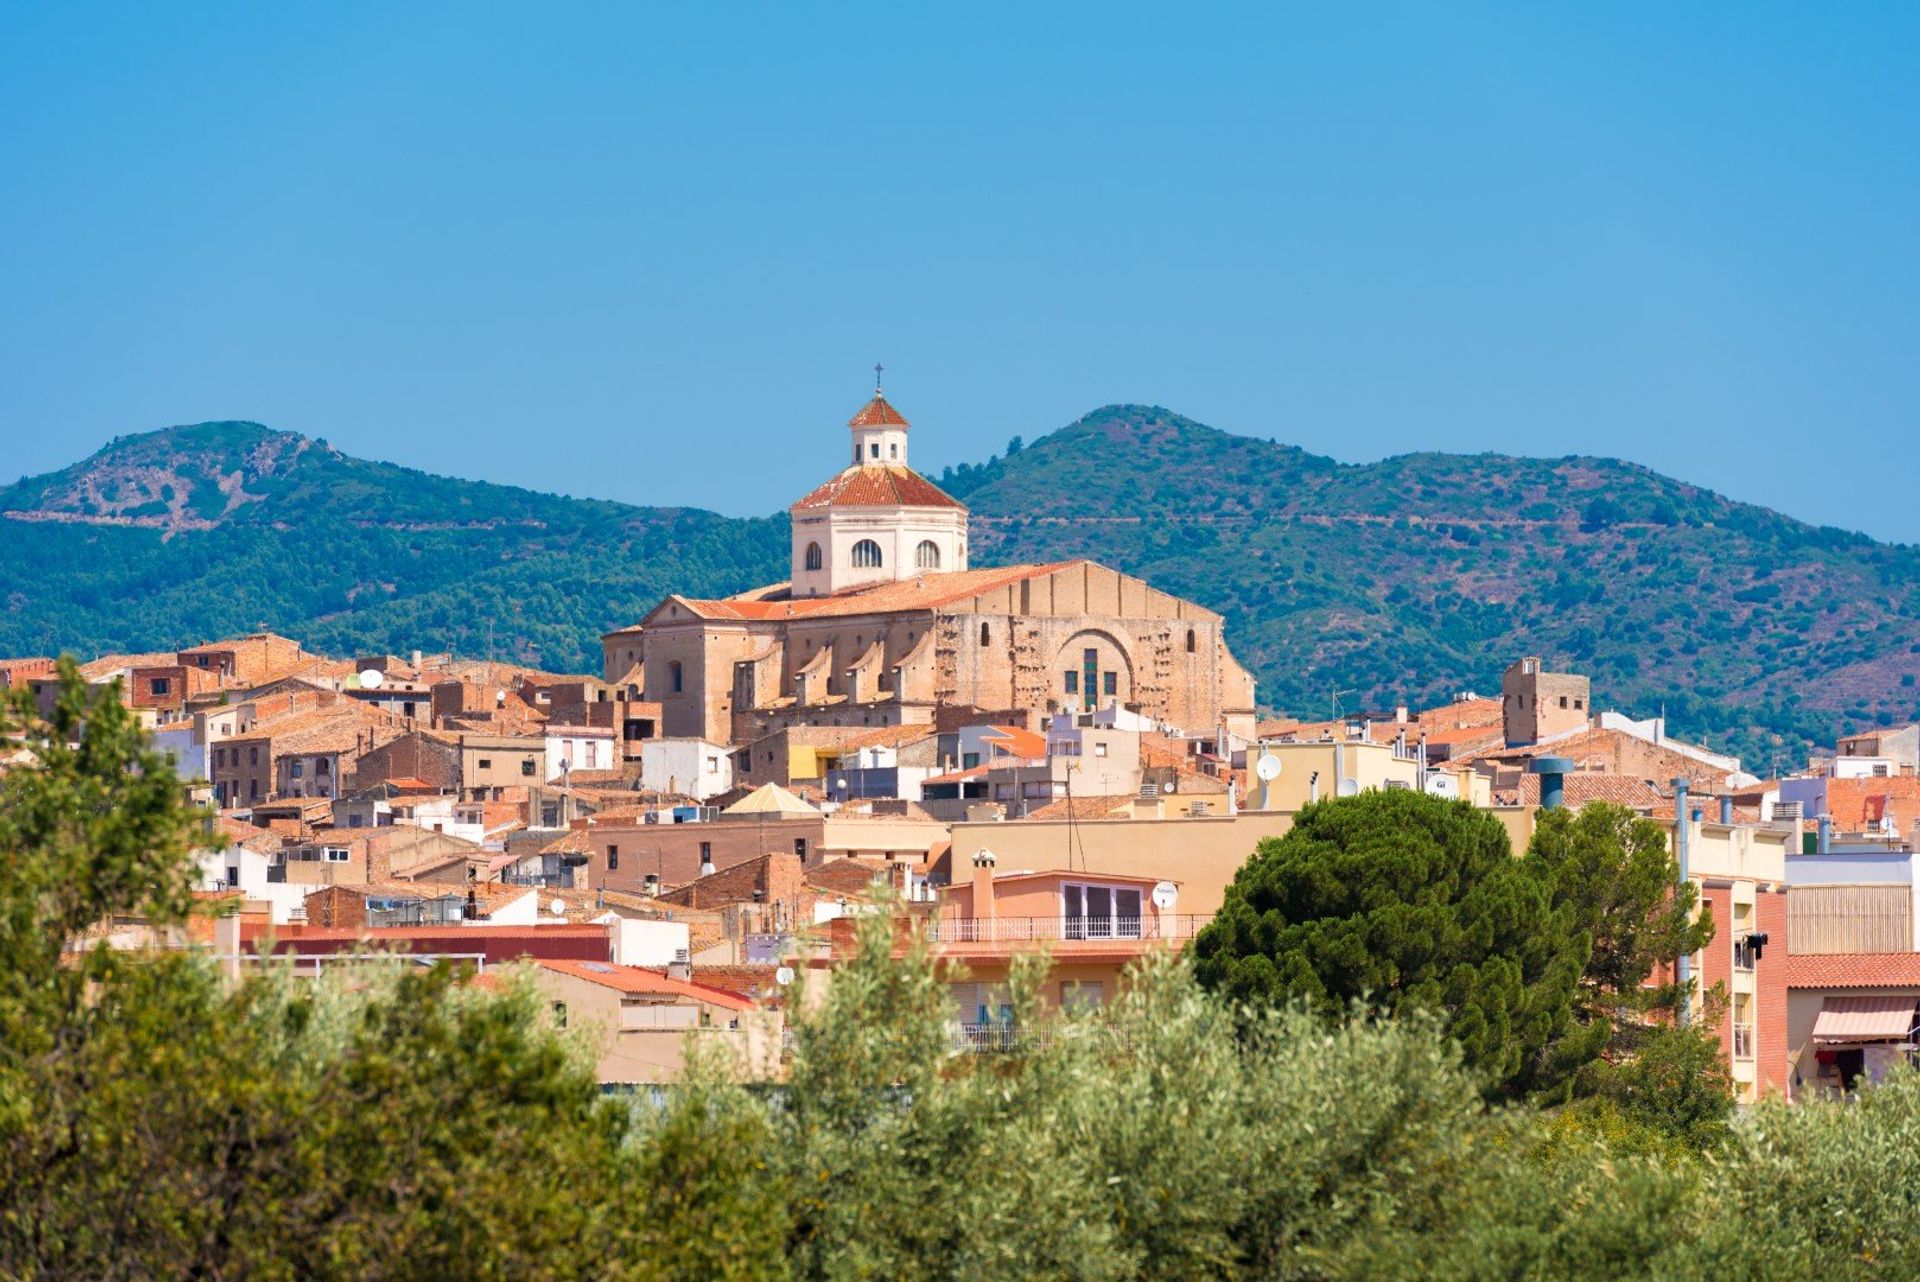 The historic town of Mont-Roig del Camp, between the Serra de Colldejou and the Mediterranean